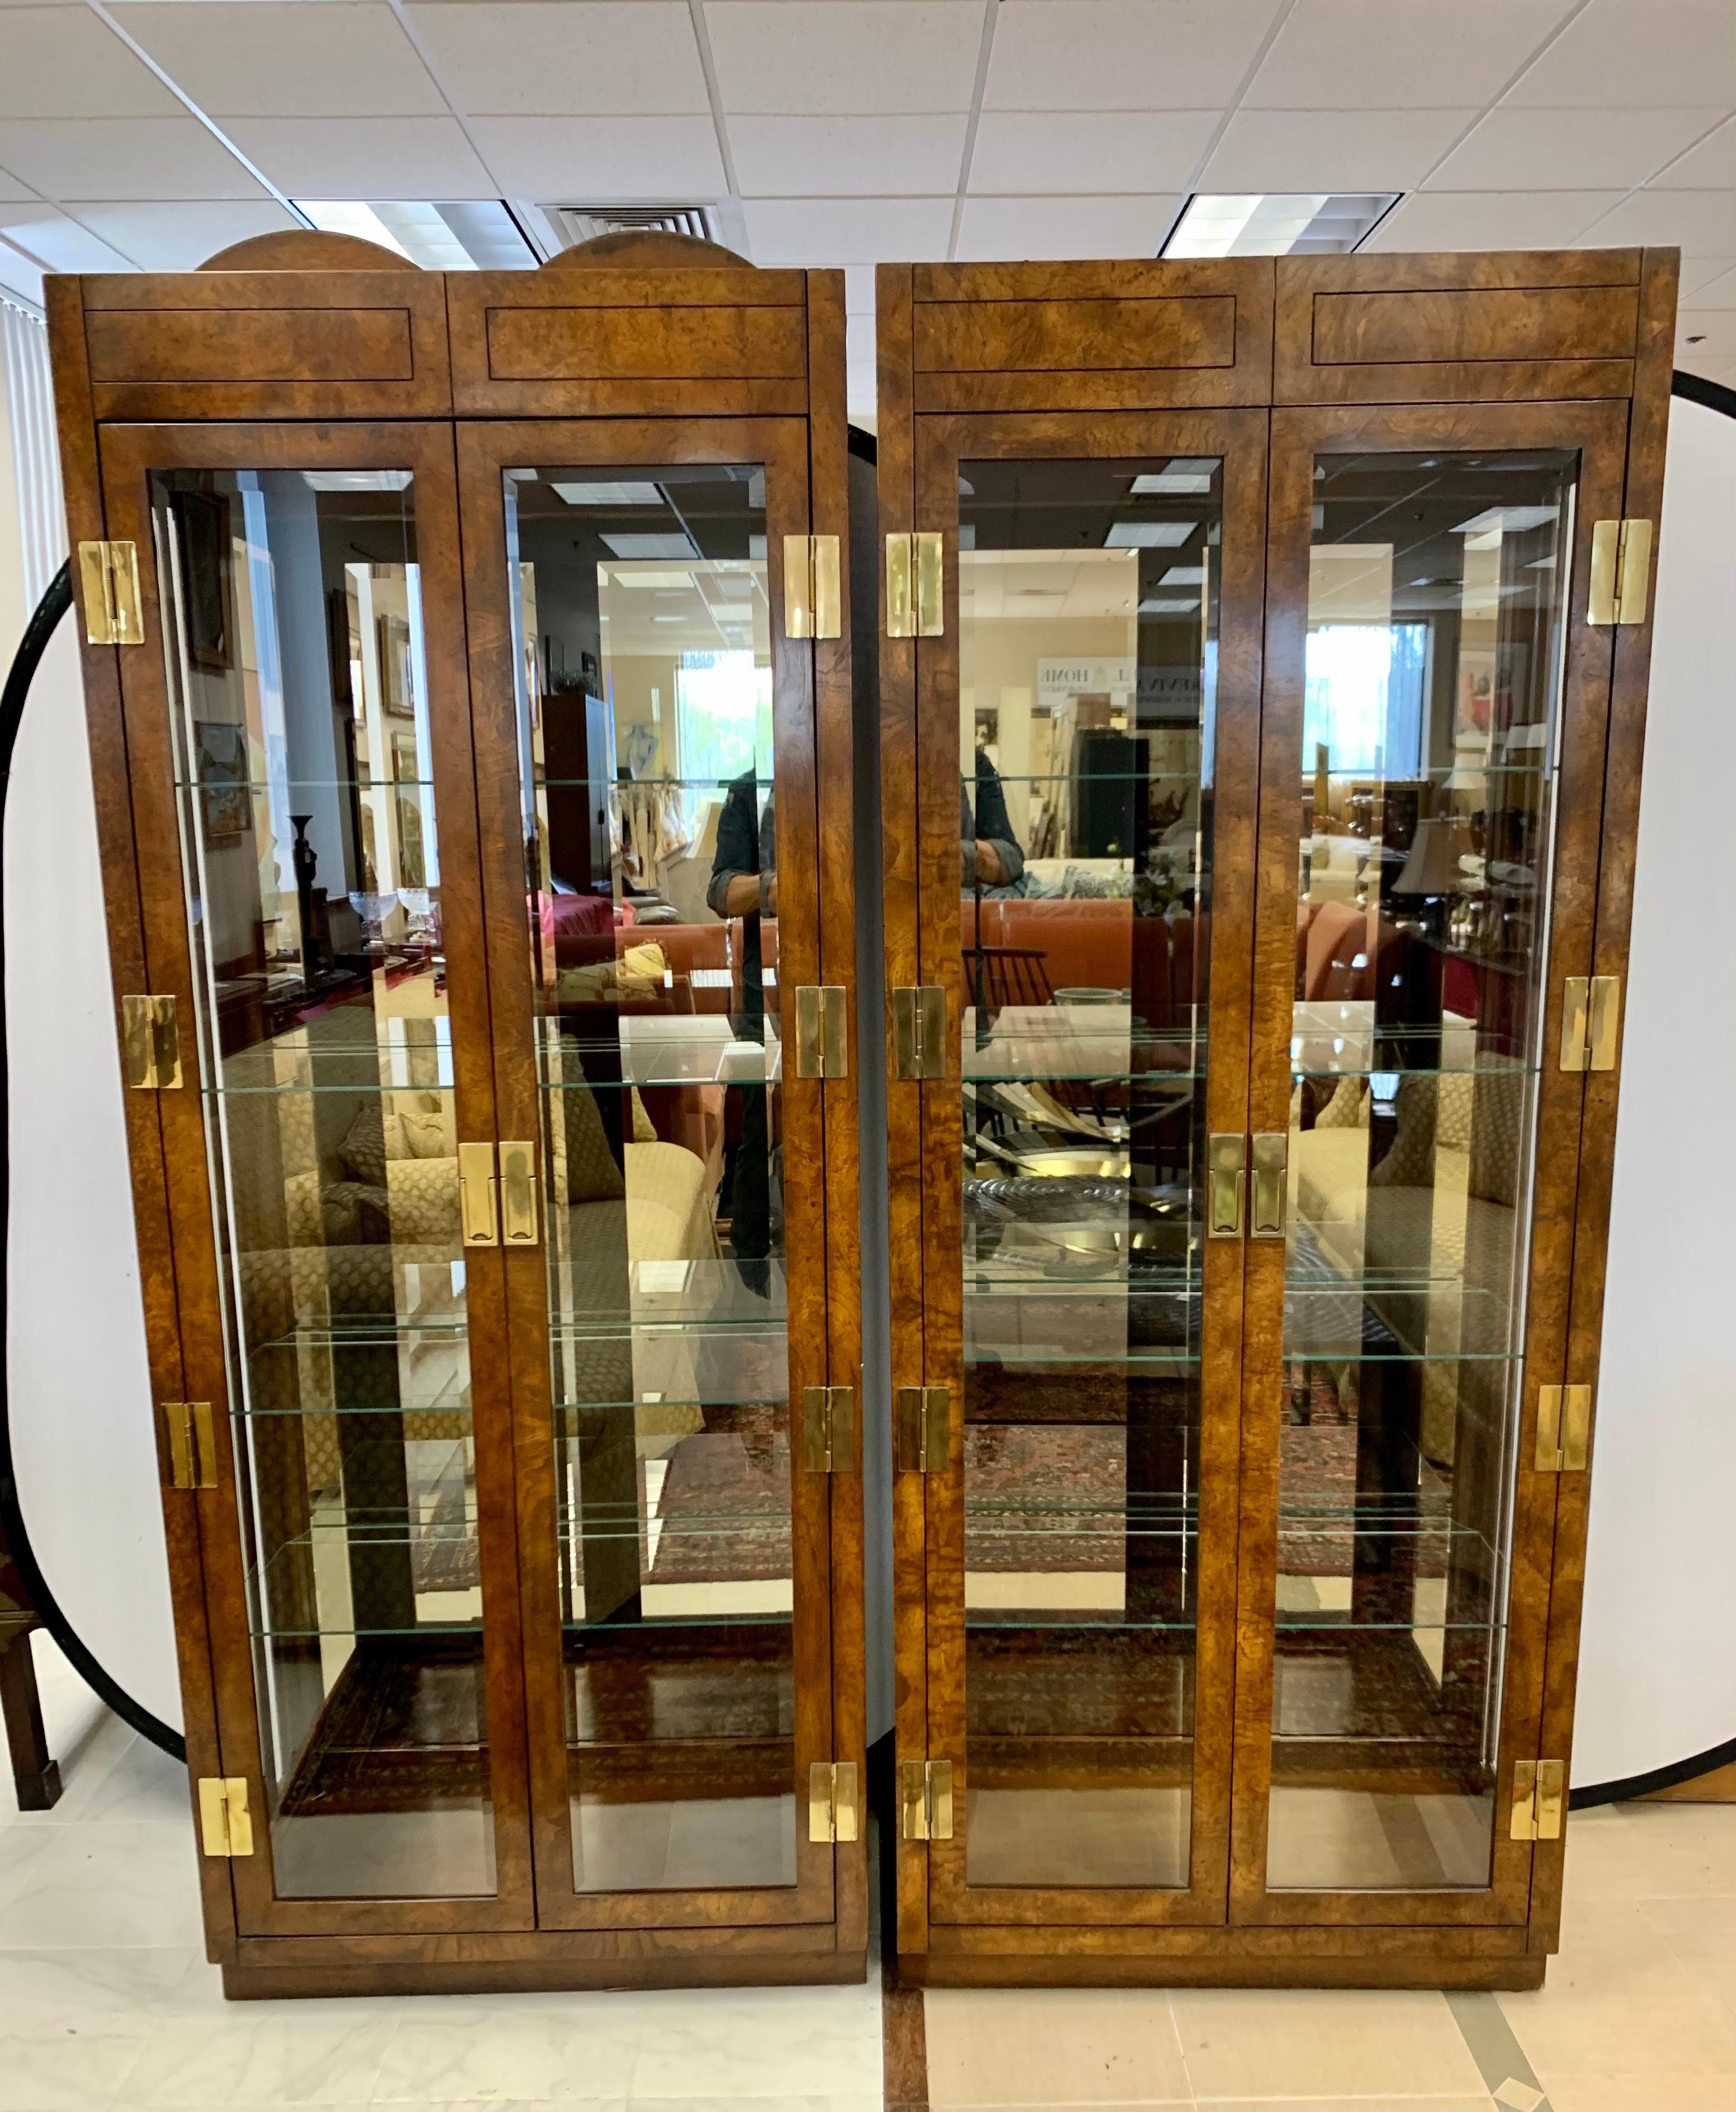 Matching pair of rare and iconic signed mid century burl and glass vitrines from American of Martinsville. Made in the USA, circa 1970's. Come with custom glass shelves and fully electrified. Campaign styling at its best. Features all original brass